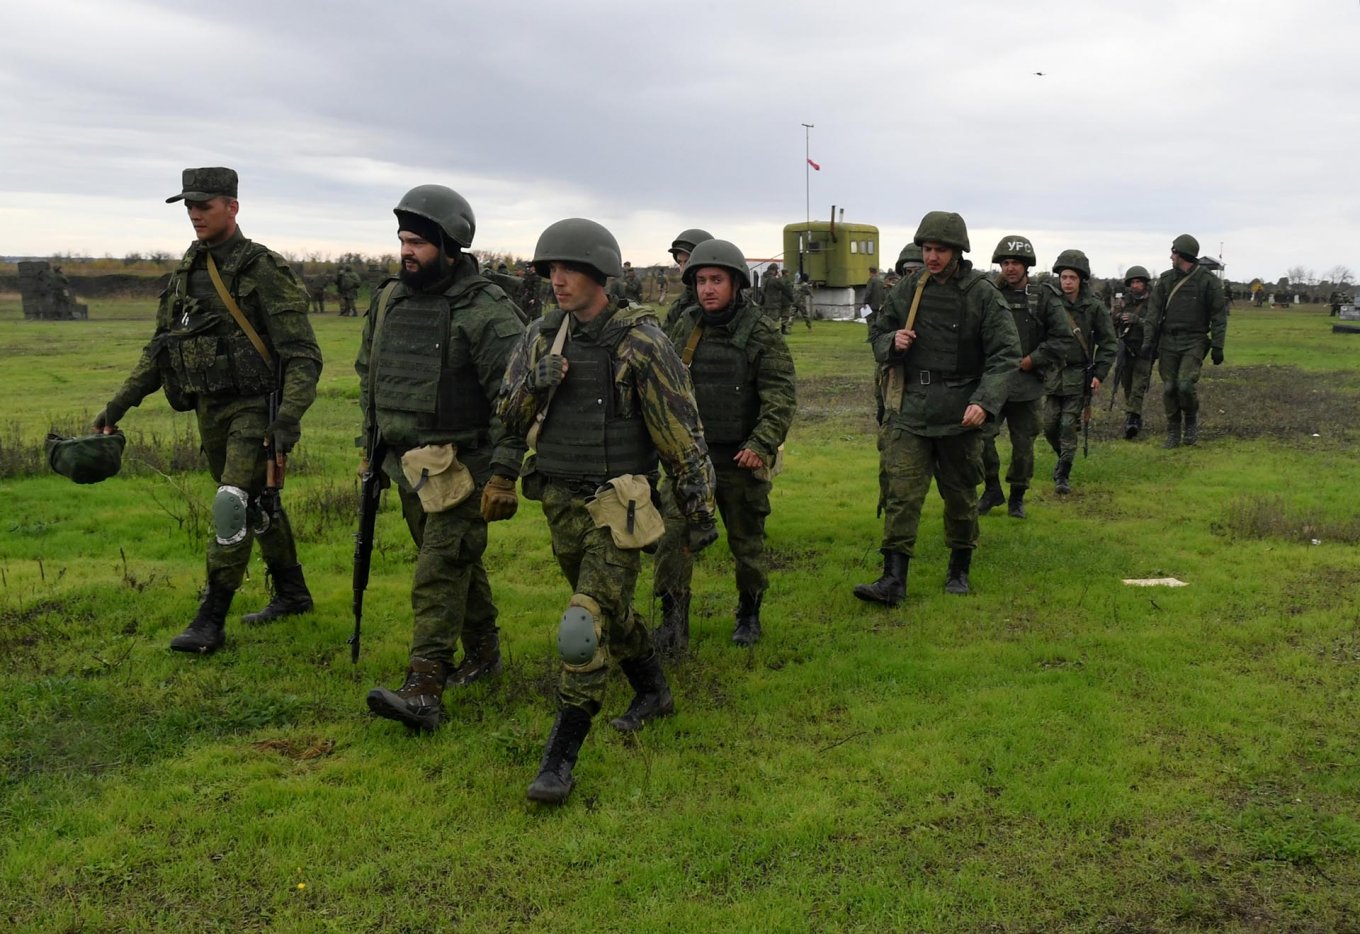 russian mobilized troops on a training ground in occupied territories of Ukraine / Defense Express / Key Facts About New Mobilization in russia, Aiming to Draft 300,000 Personnel Starting June 1st